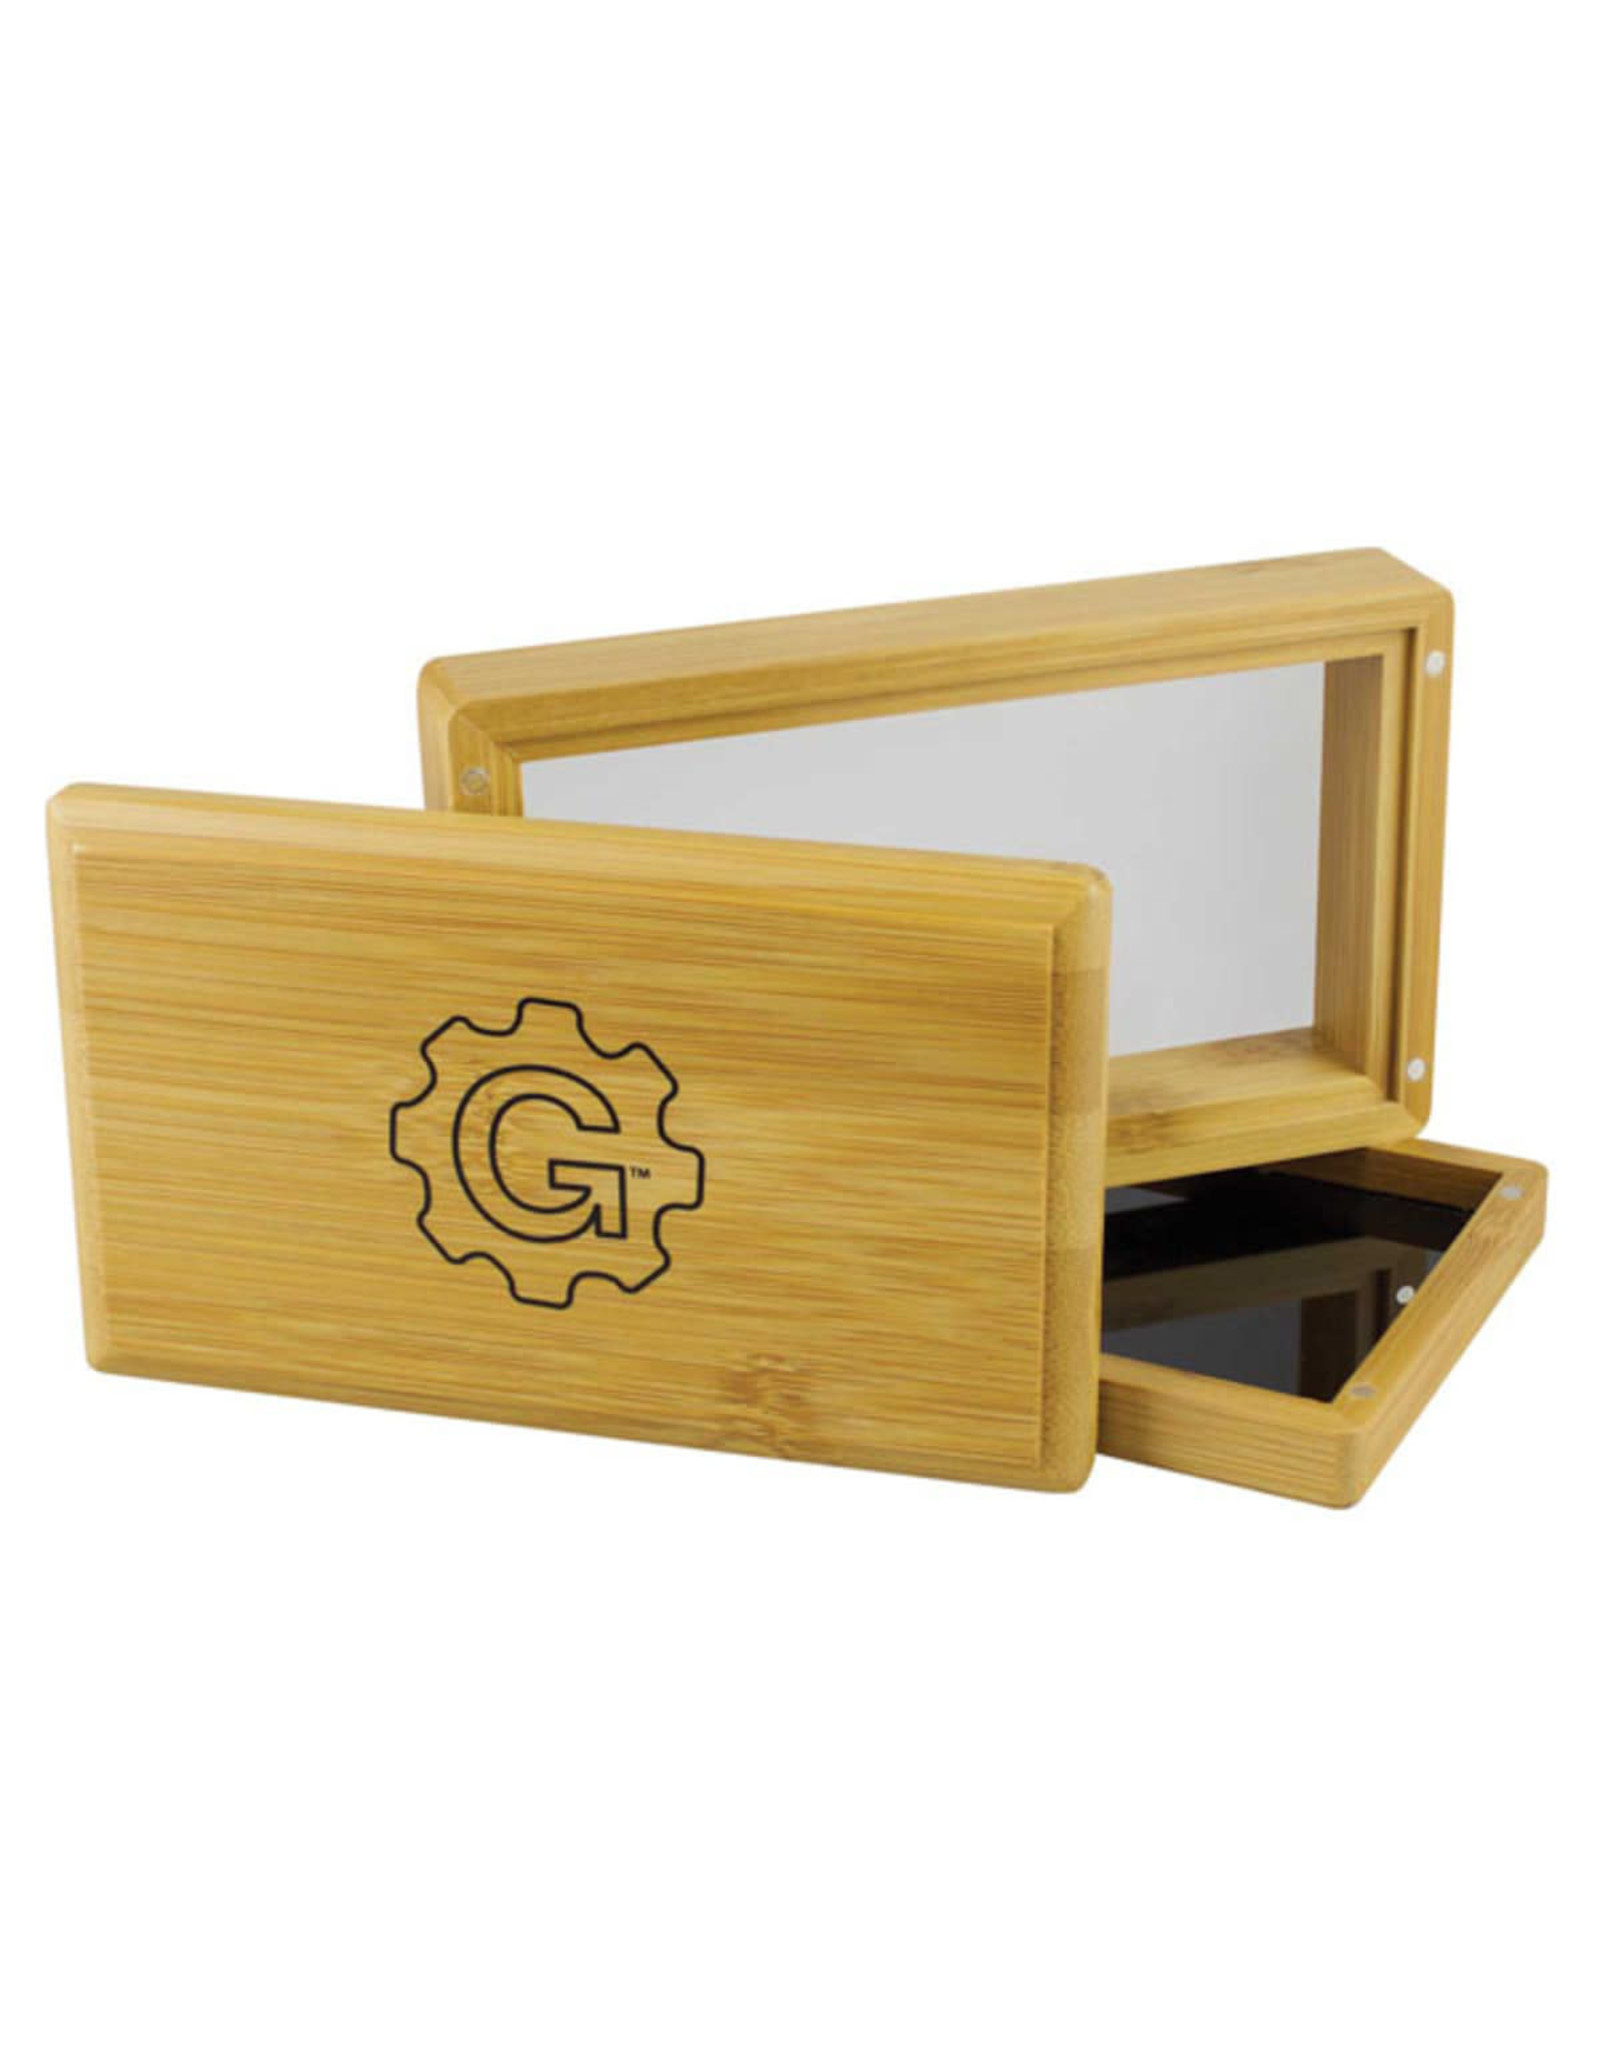 Grindhouse Bamboo Small Sifter Box 3"x5"